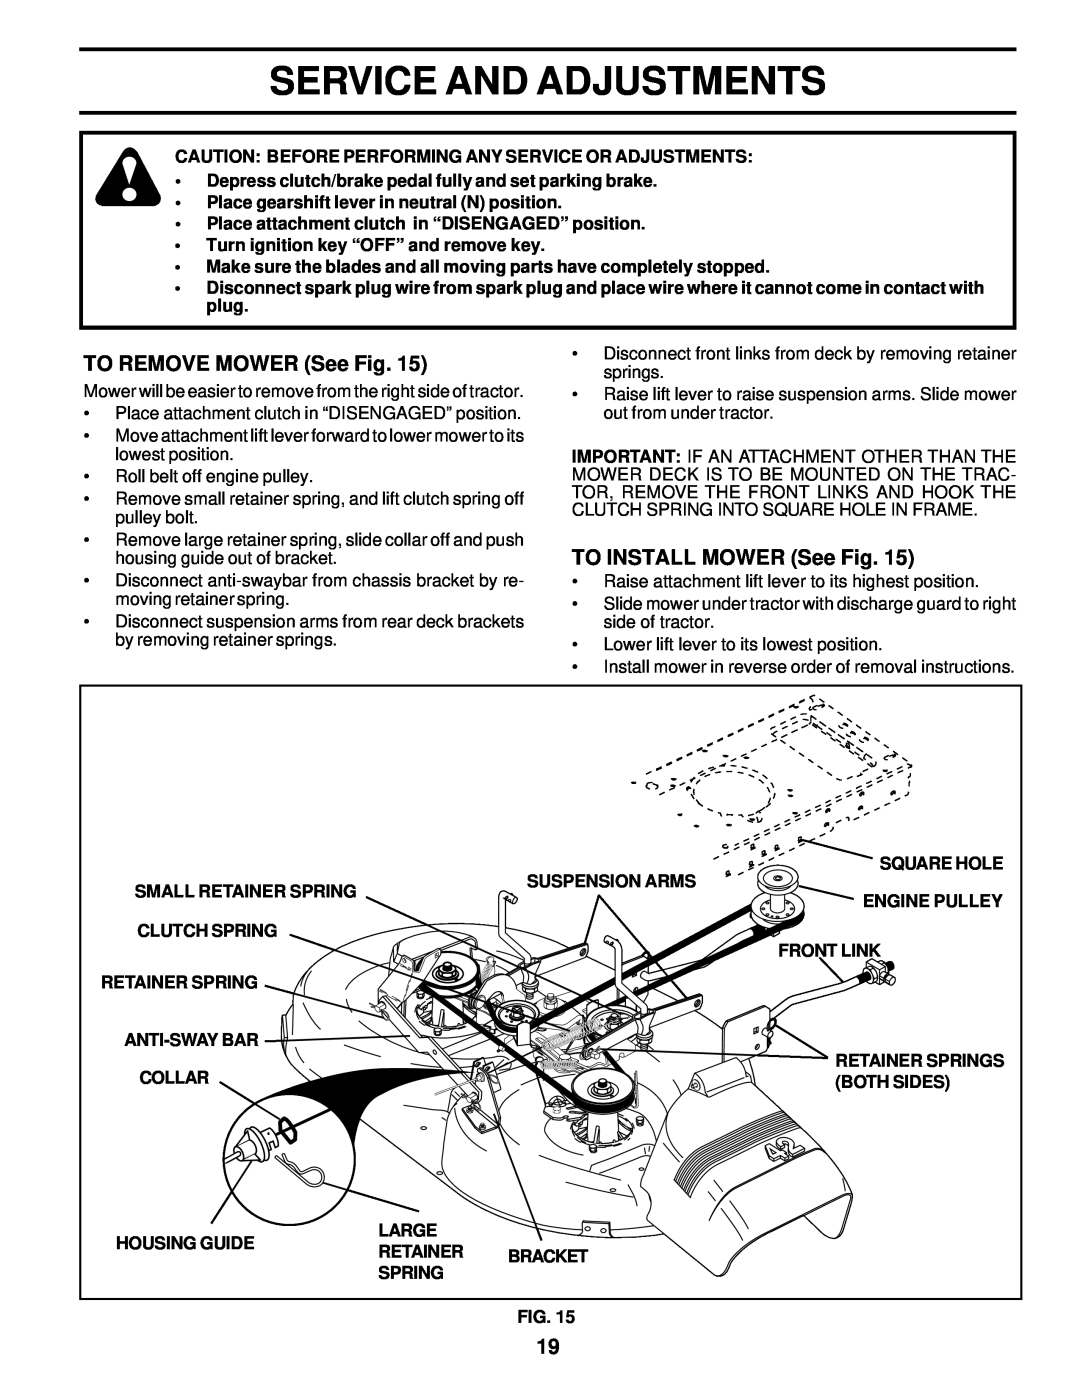 Weed Eater 177677 owner manual Service And Adjustments, TO REMOVE MOWER See Fig, TO INSTALL MOWER See Fig 